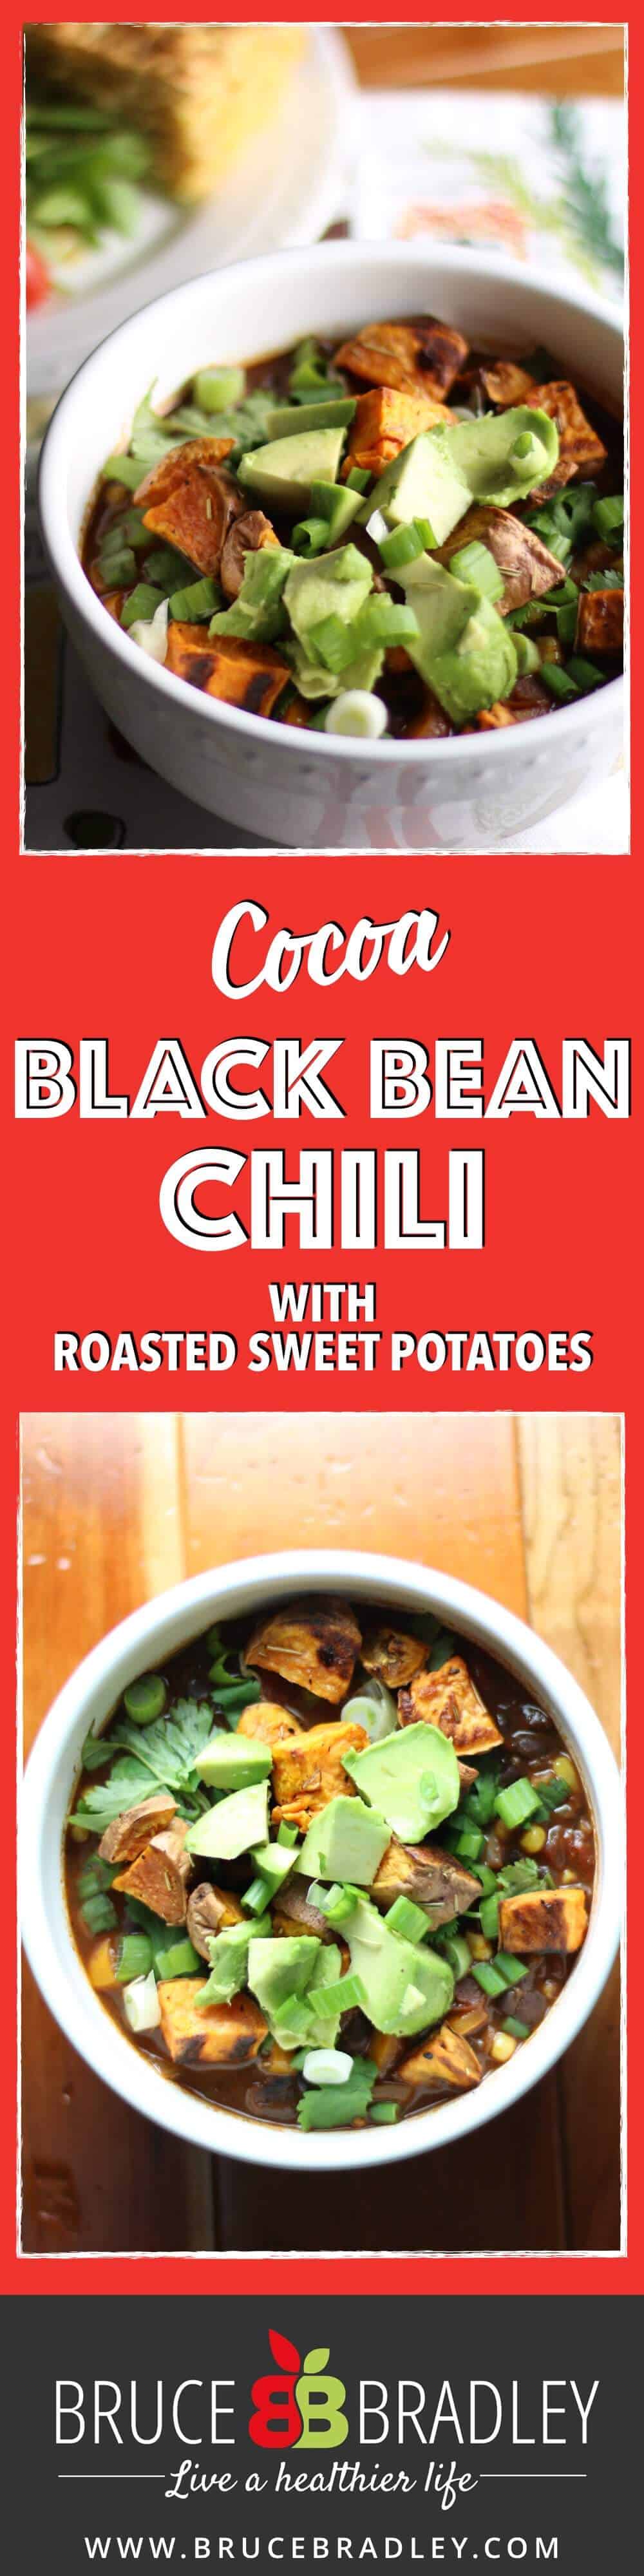 This Cocoa Black Bean Chili Recipe Is Super Easy And Made With Black Beans, Cocoa, And Sweet Potatoes. Seriously, It'S So Delicious And Hearty Nobody Will Know It'S Vegan!